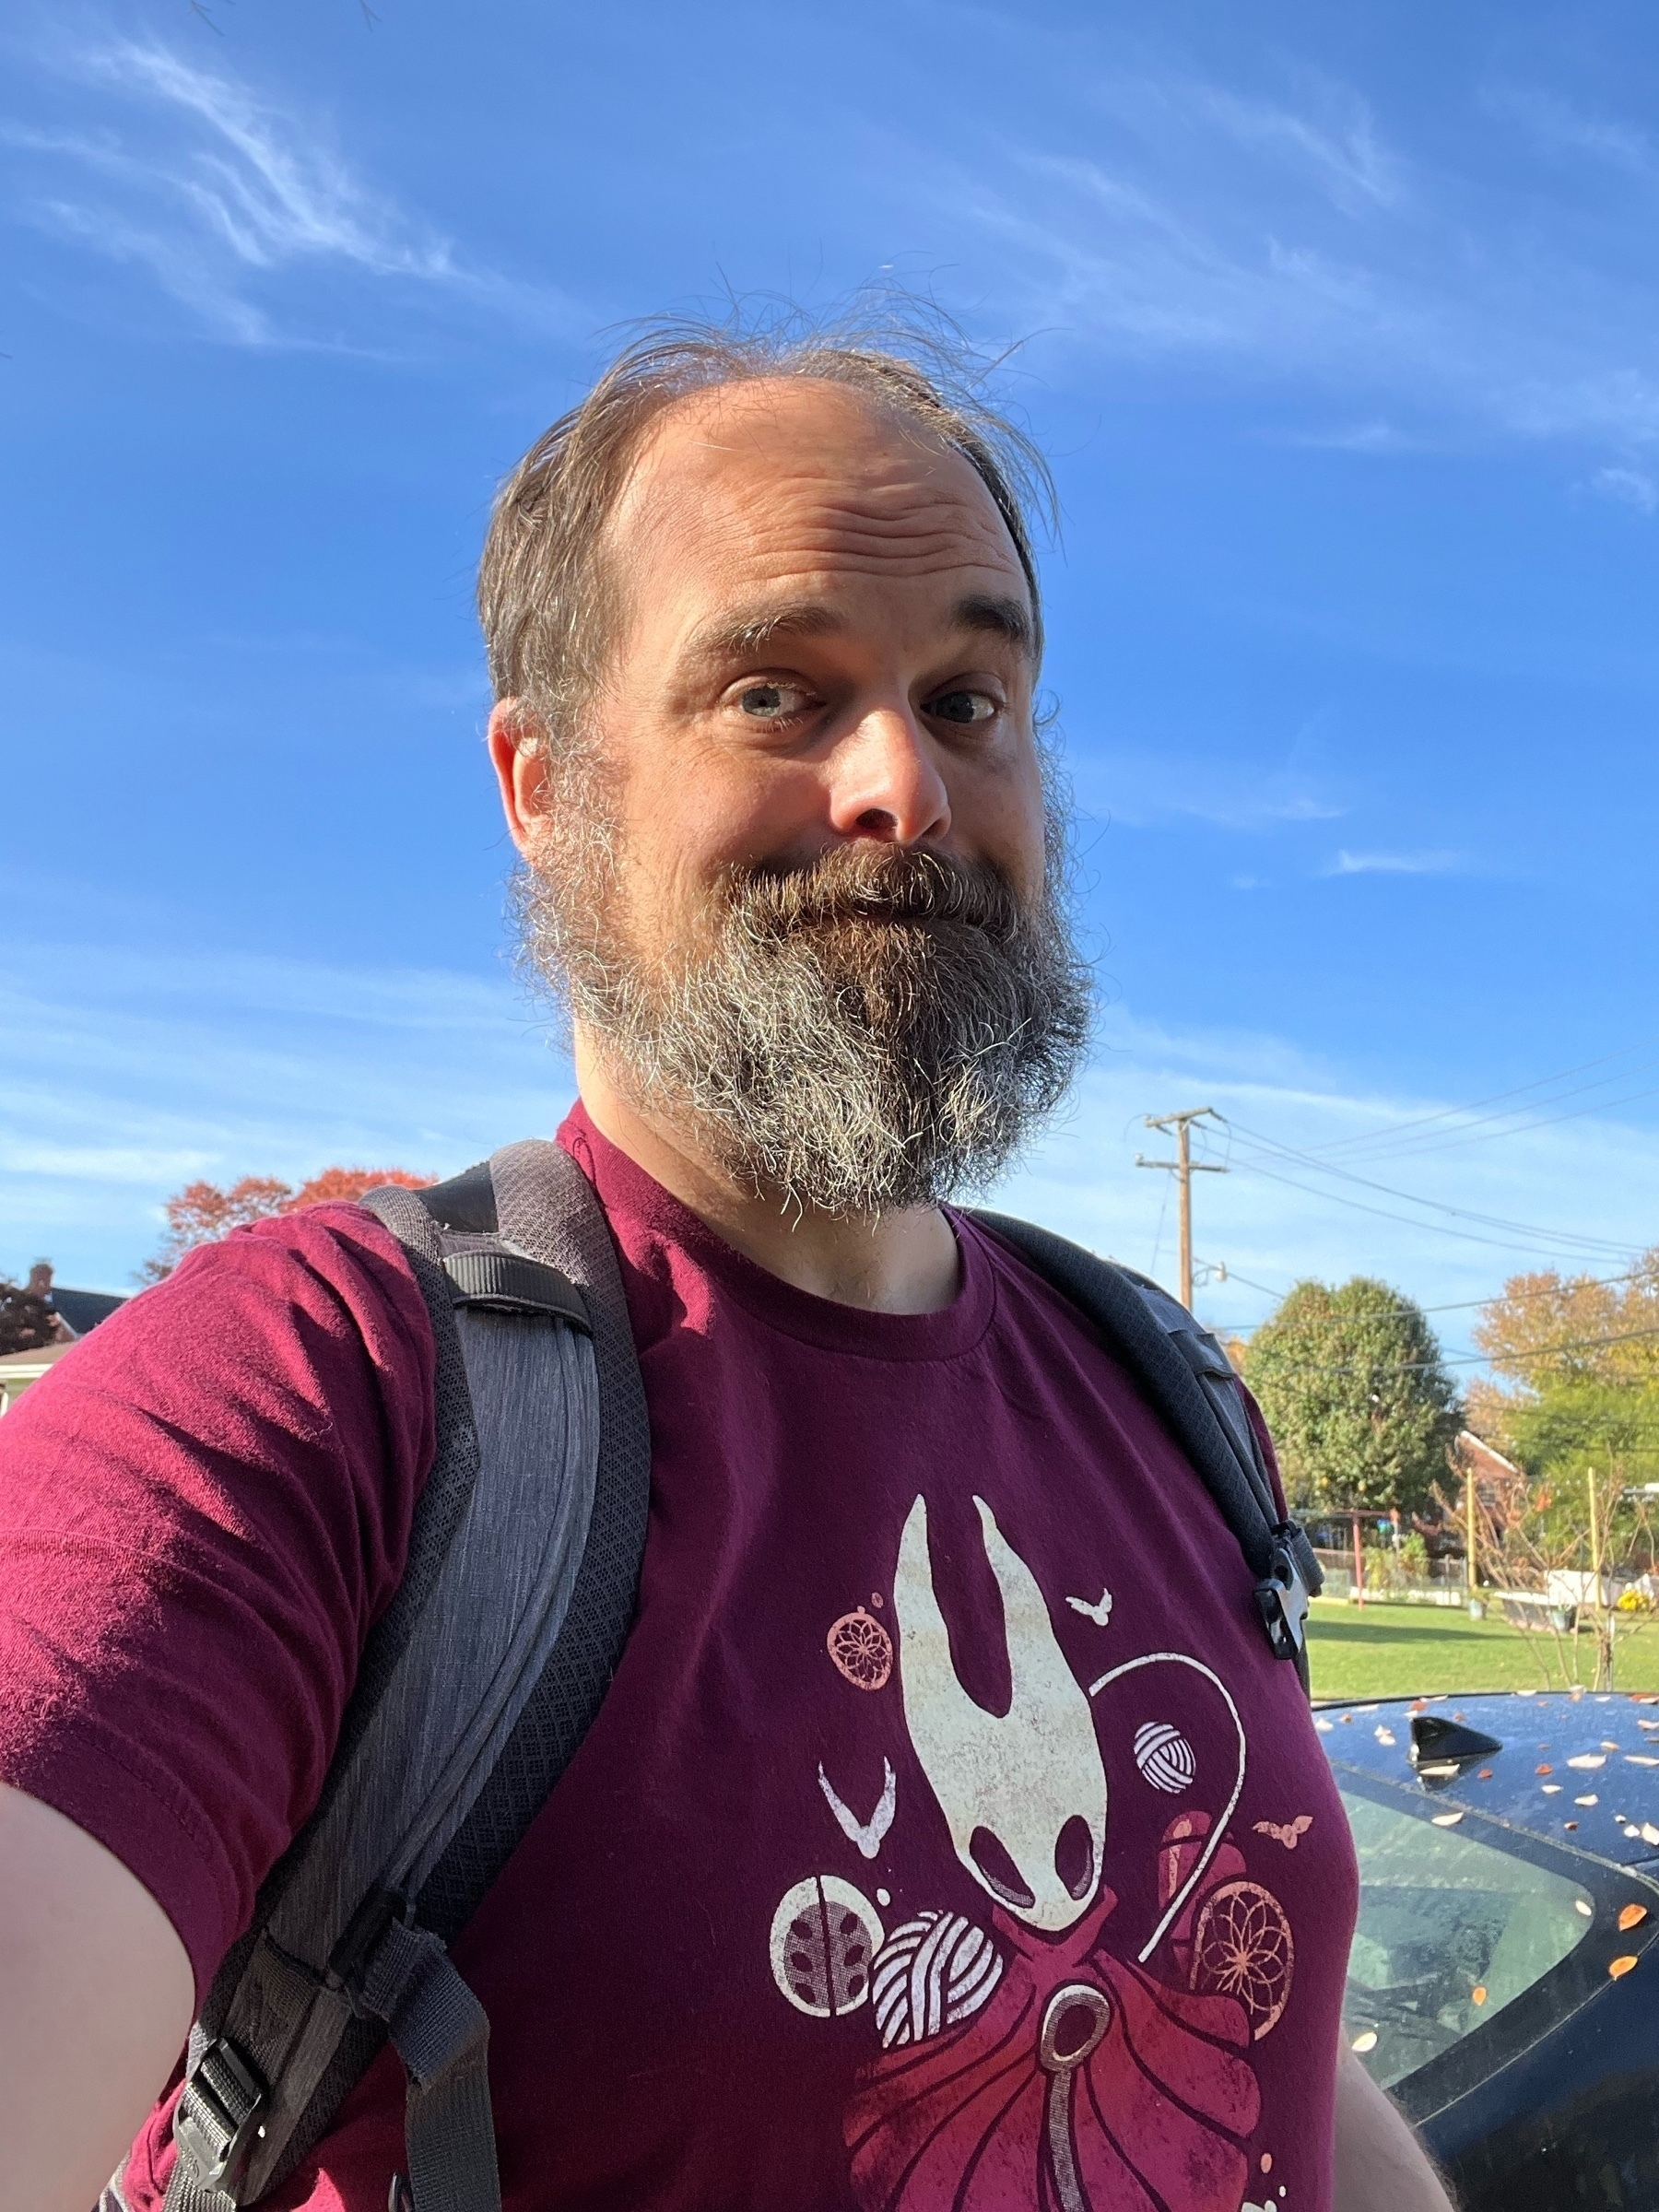 Sam stands in front of a blue sky wearing his Hornet (from Hollow Knight) shirt and his backpack.